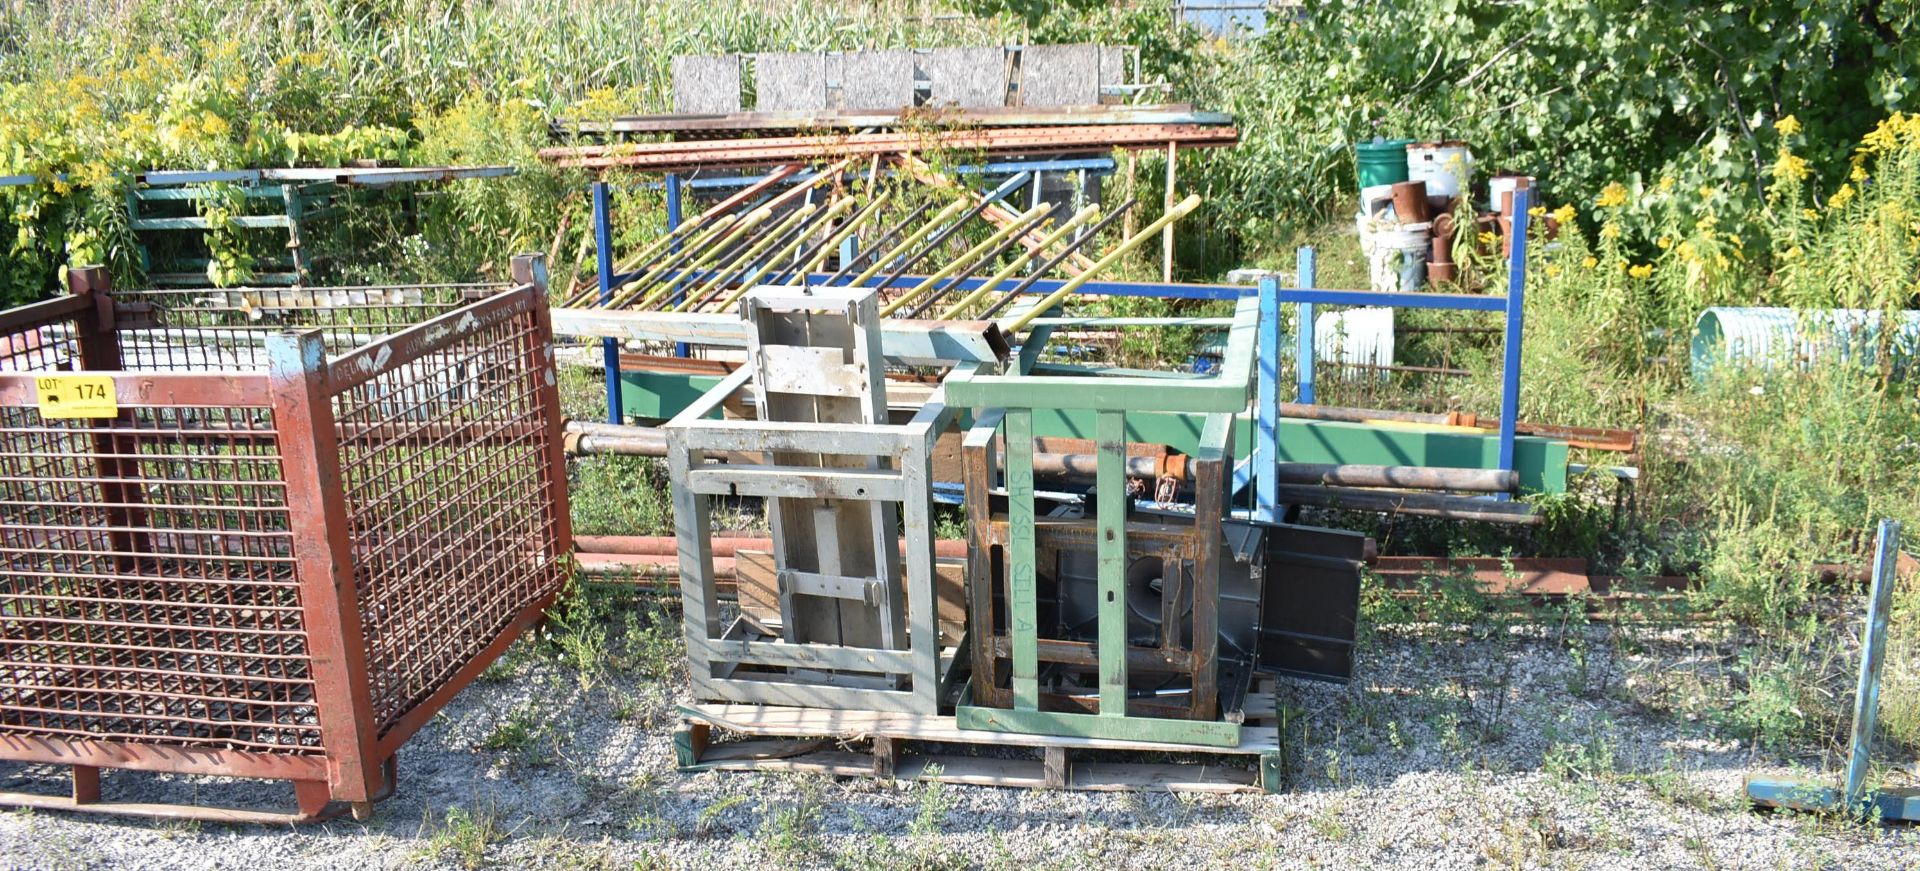 LOT/ SURPLUS MATERIALS IN YARD (LOCATED AT 1636 CHARLES ST, WHITBY, ON L1N 1B9) - Image 2 of 5